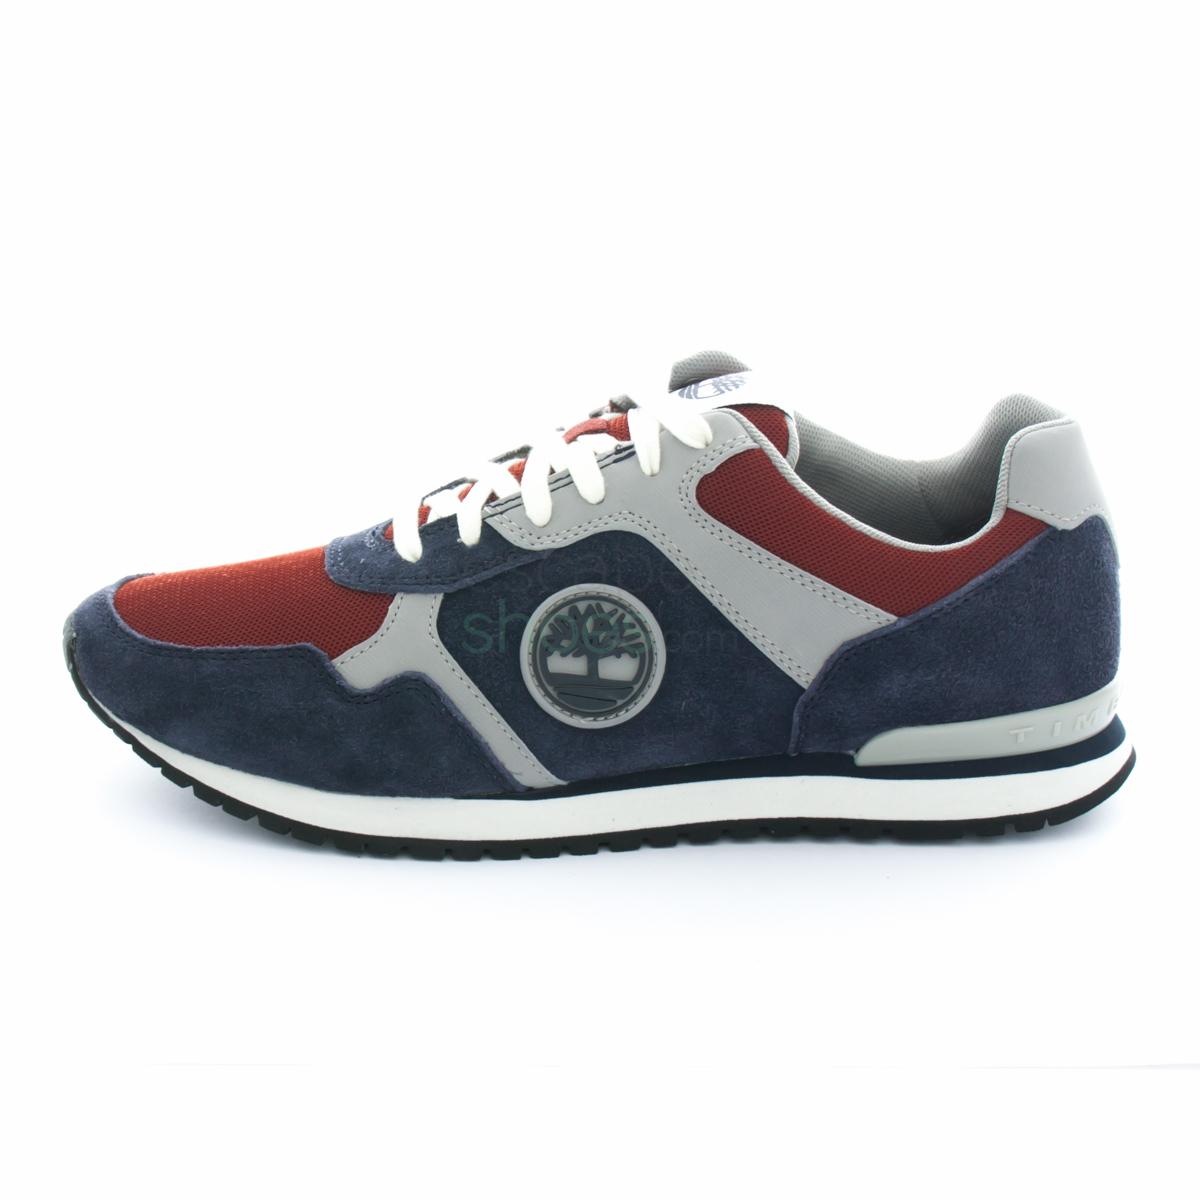 Sneakers TIMBERLAND Retro Runner Oxford Total Eclipse A1GJO